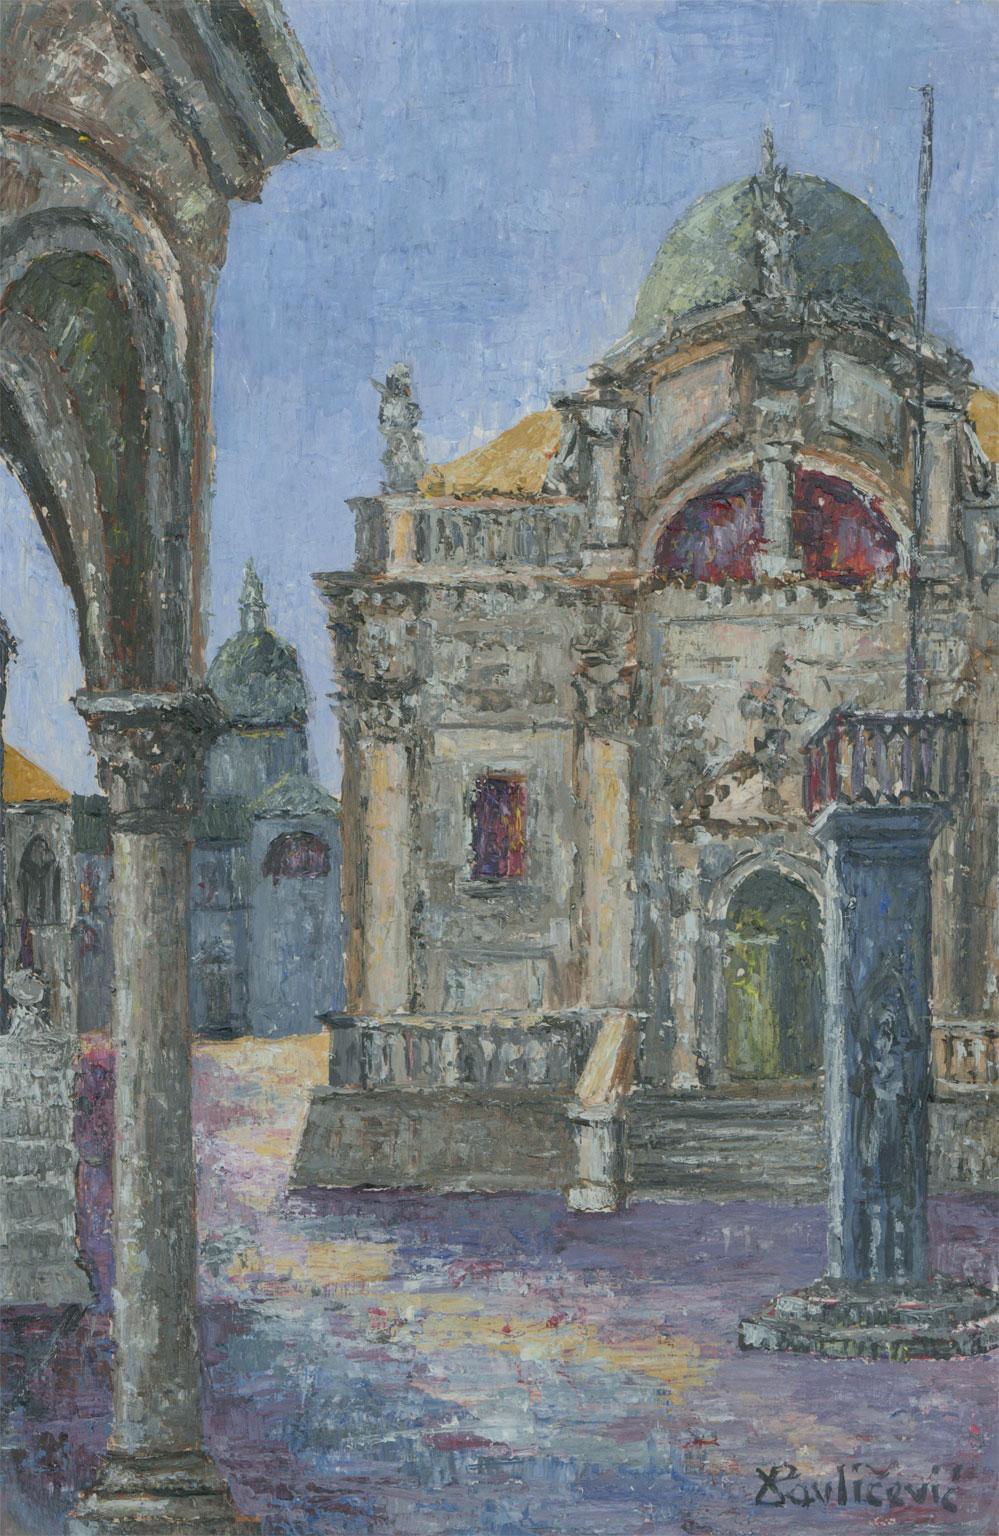 Pavlicevic - Croatian Contemporary Oil, View of a Church 1